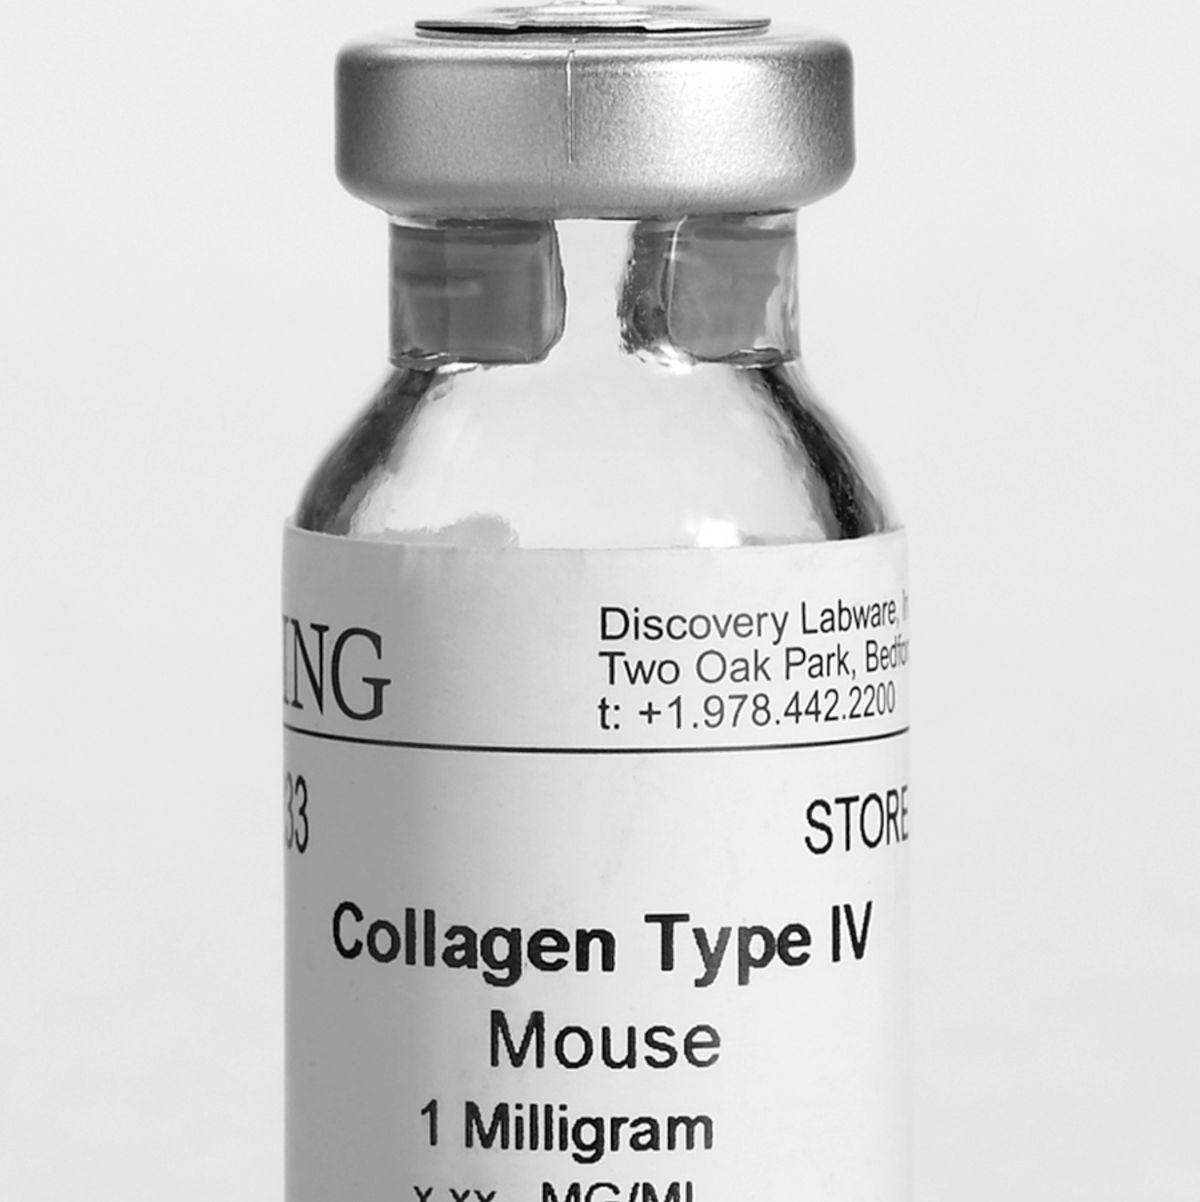 Collagen IV Mouse Natural 10 mg (10 x 1mg)  小鼠天然胶原 IV 10mg